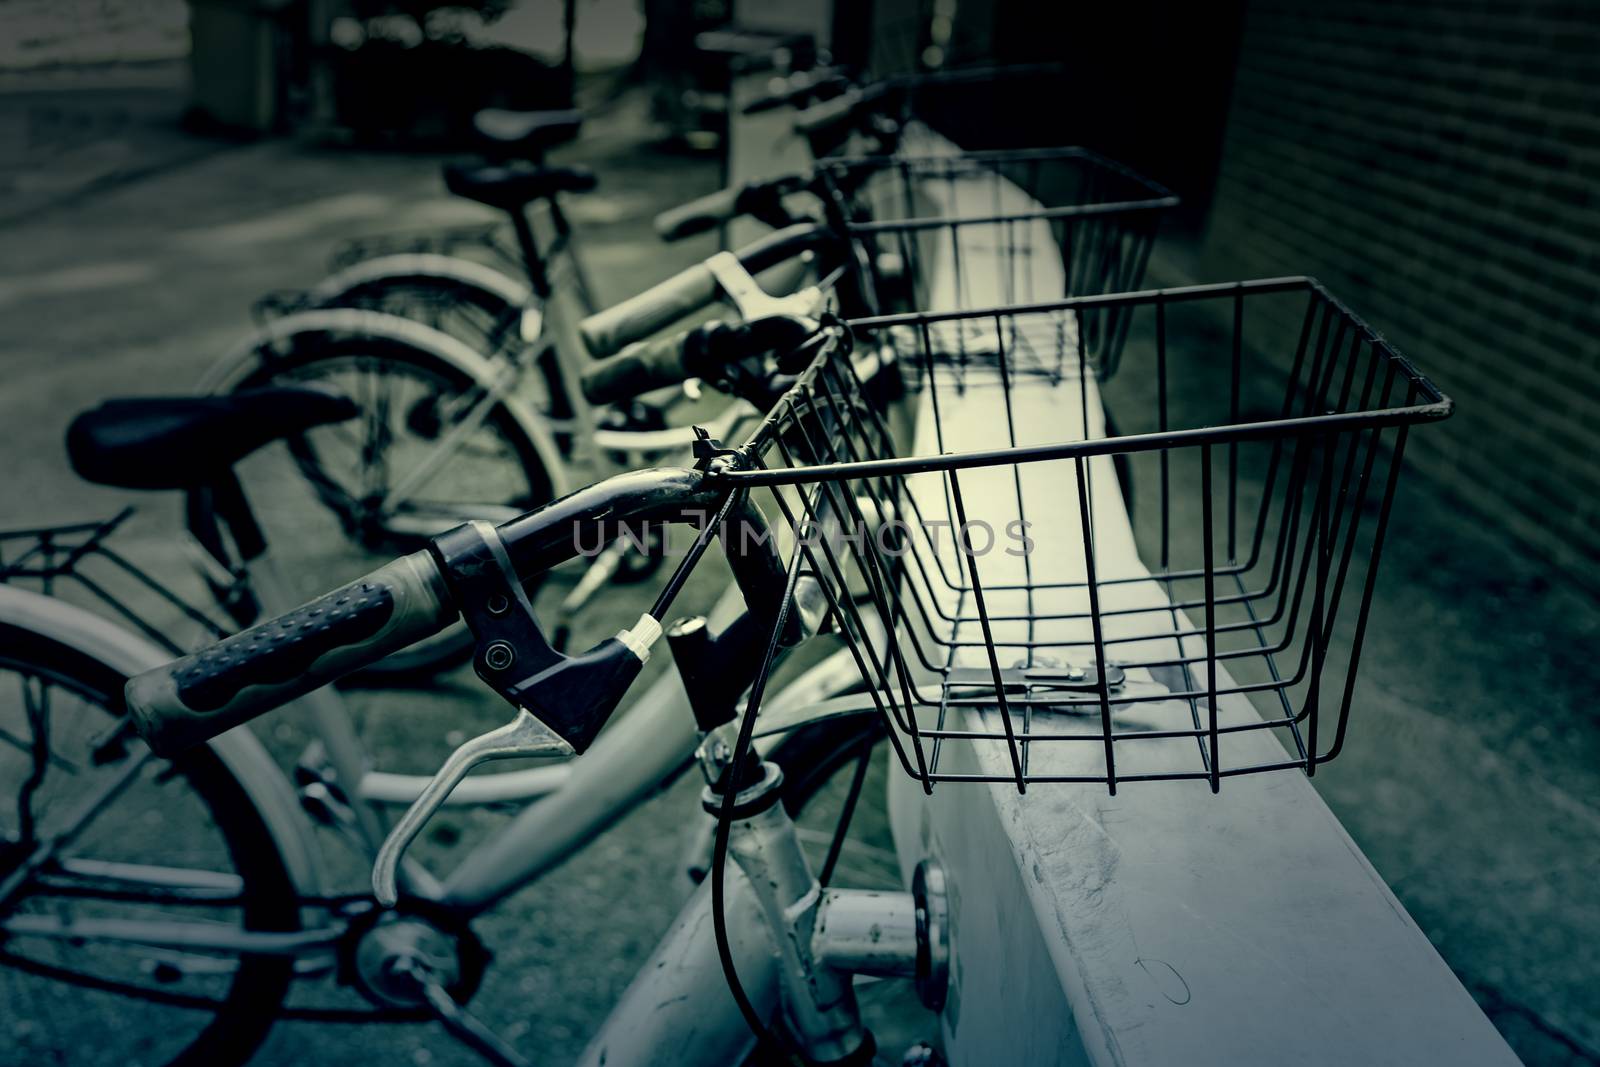 Stops in the city Bicycles, detail of a means of transportation on the street, health and environment